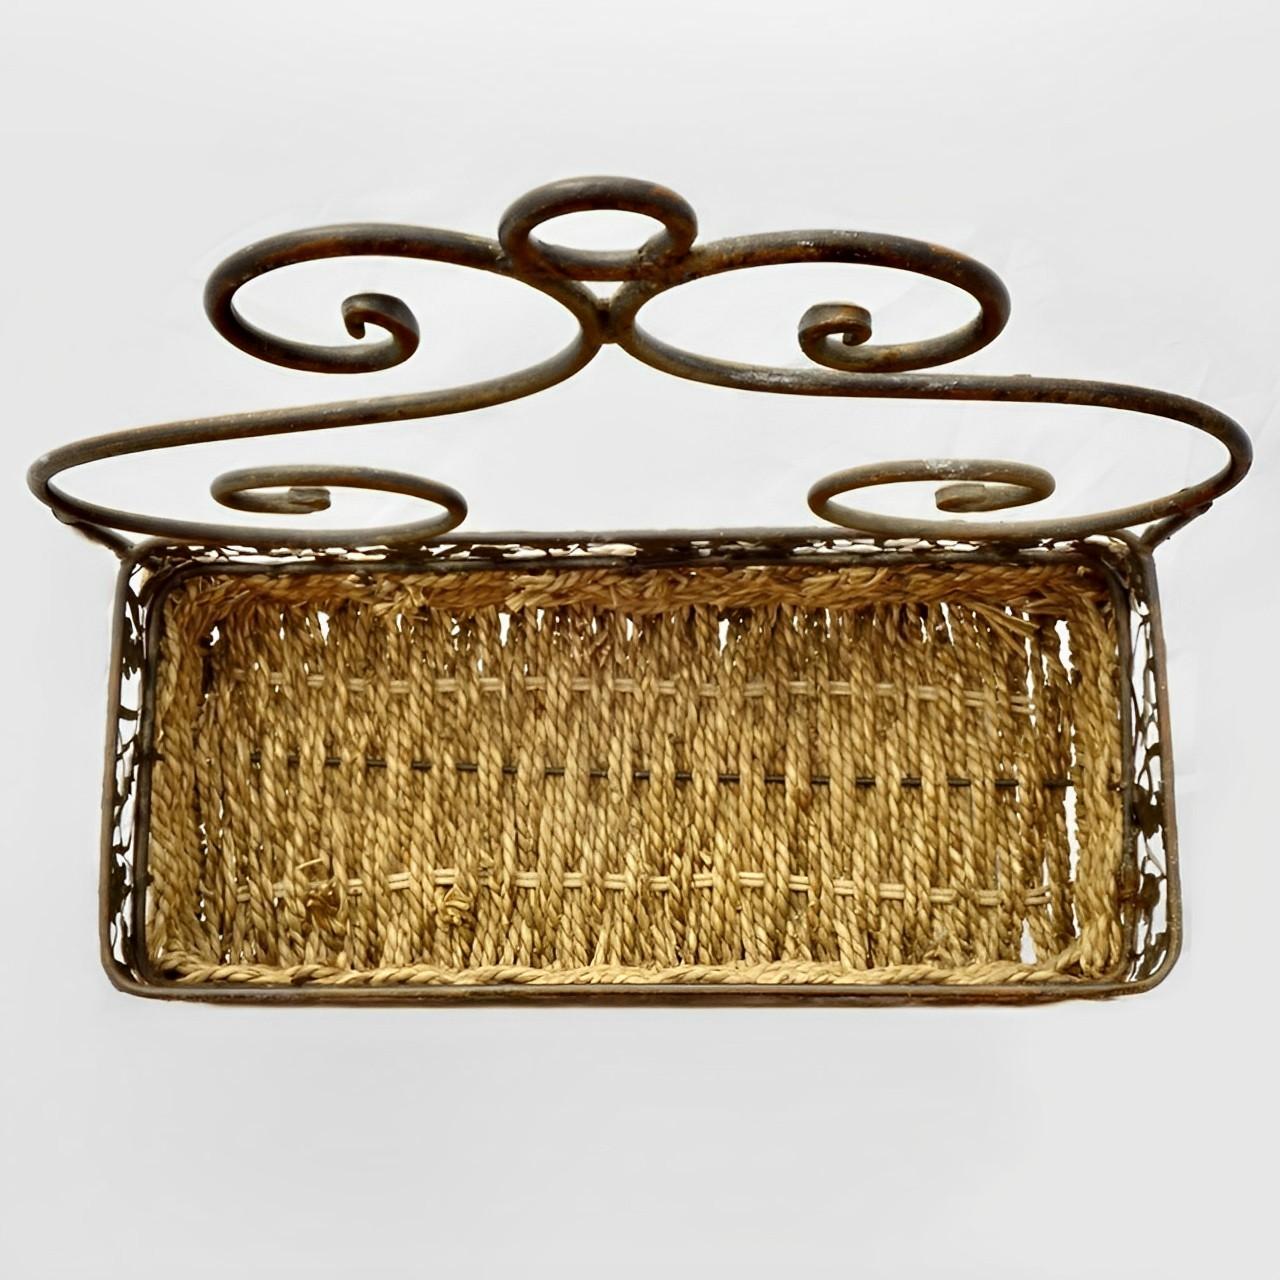 Seagrass Two Shelf Woven and Metal Grape Design Wall Hanging Unit circa 1960s For Sale